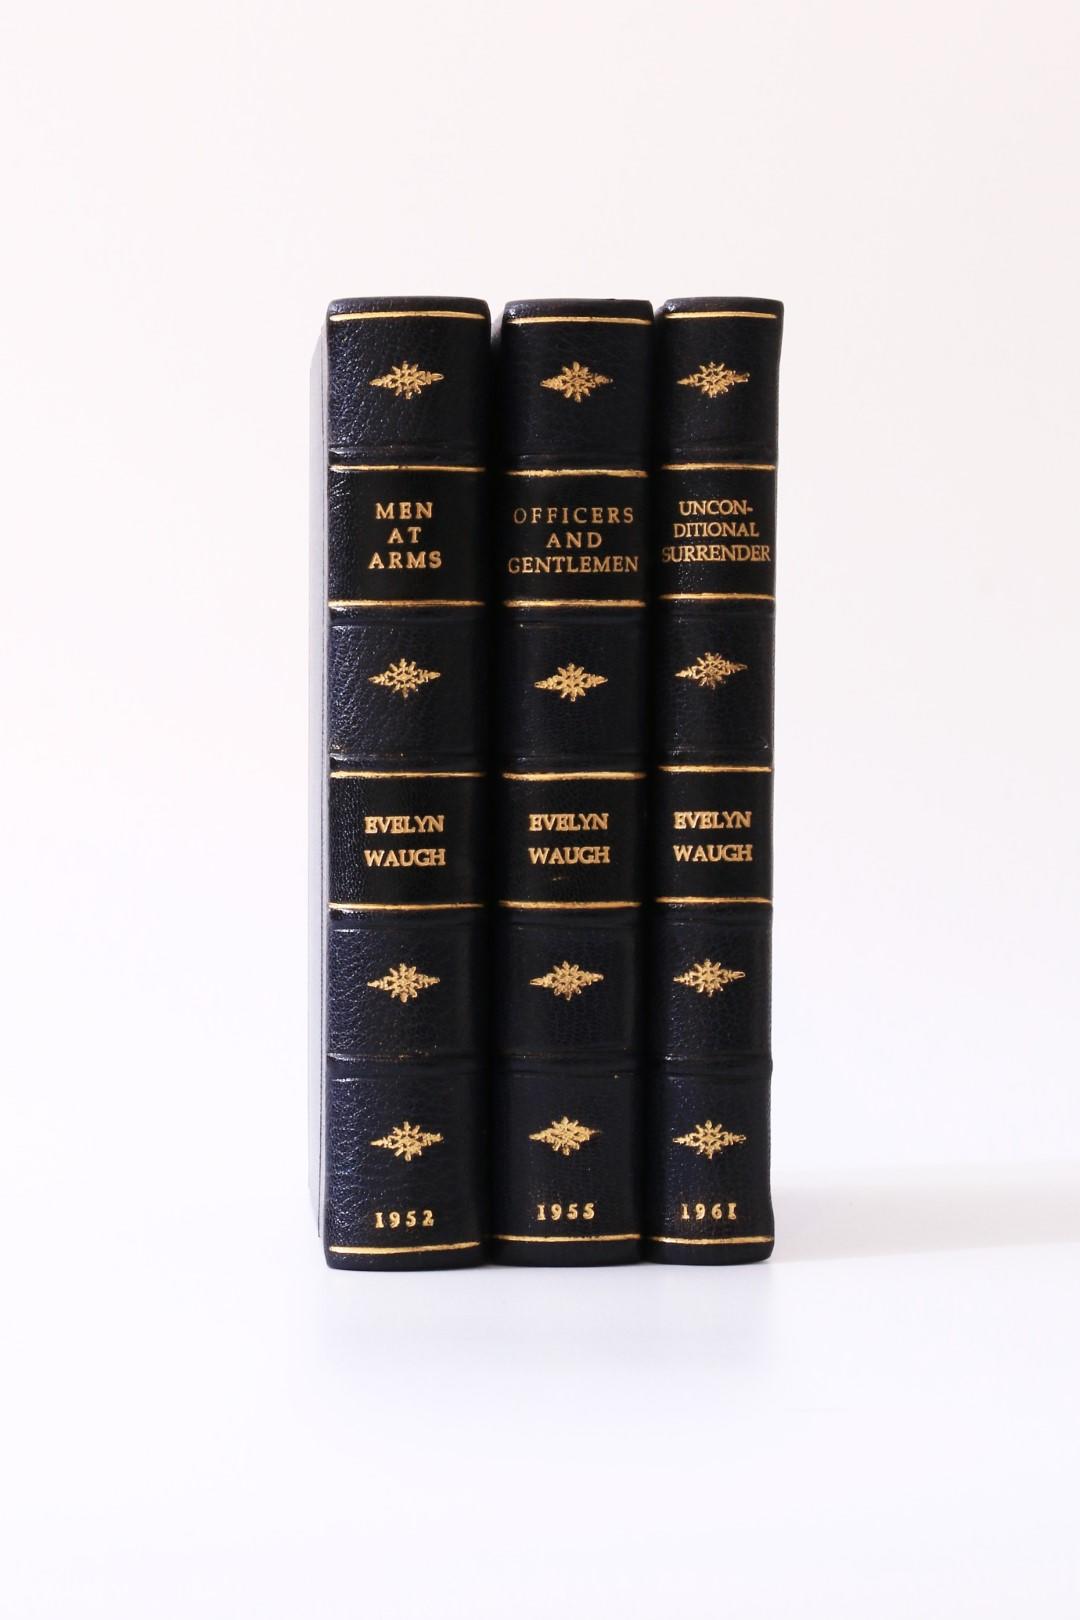 Evelyn Waugh - The Sword of Honour Trilogy [comprising] Men at Arms, Officers and Gentlemen and Unconditional Surrender - Chapman & Hall, 1952-1961, First Edition.